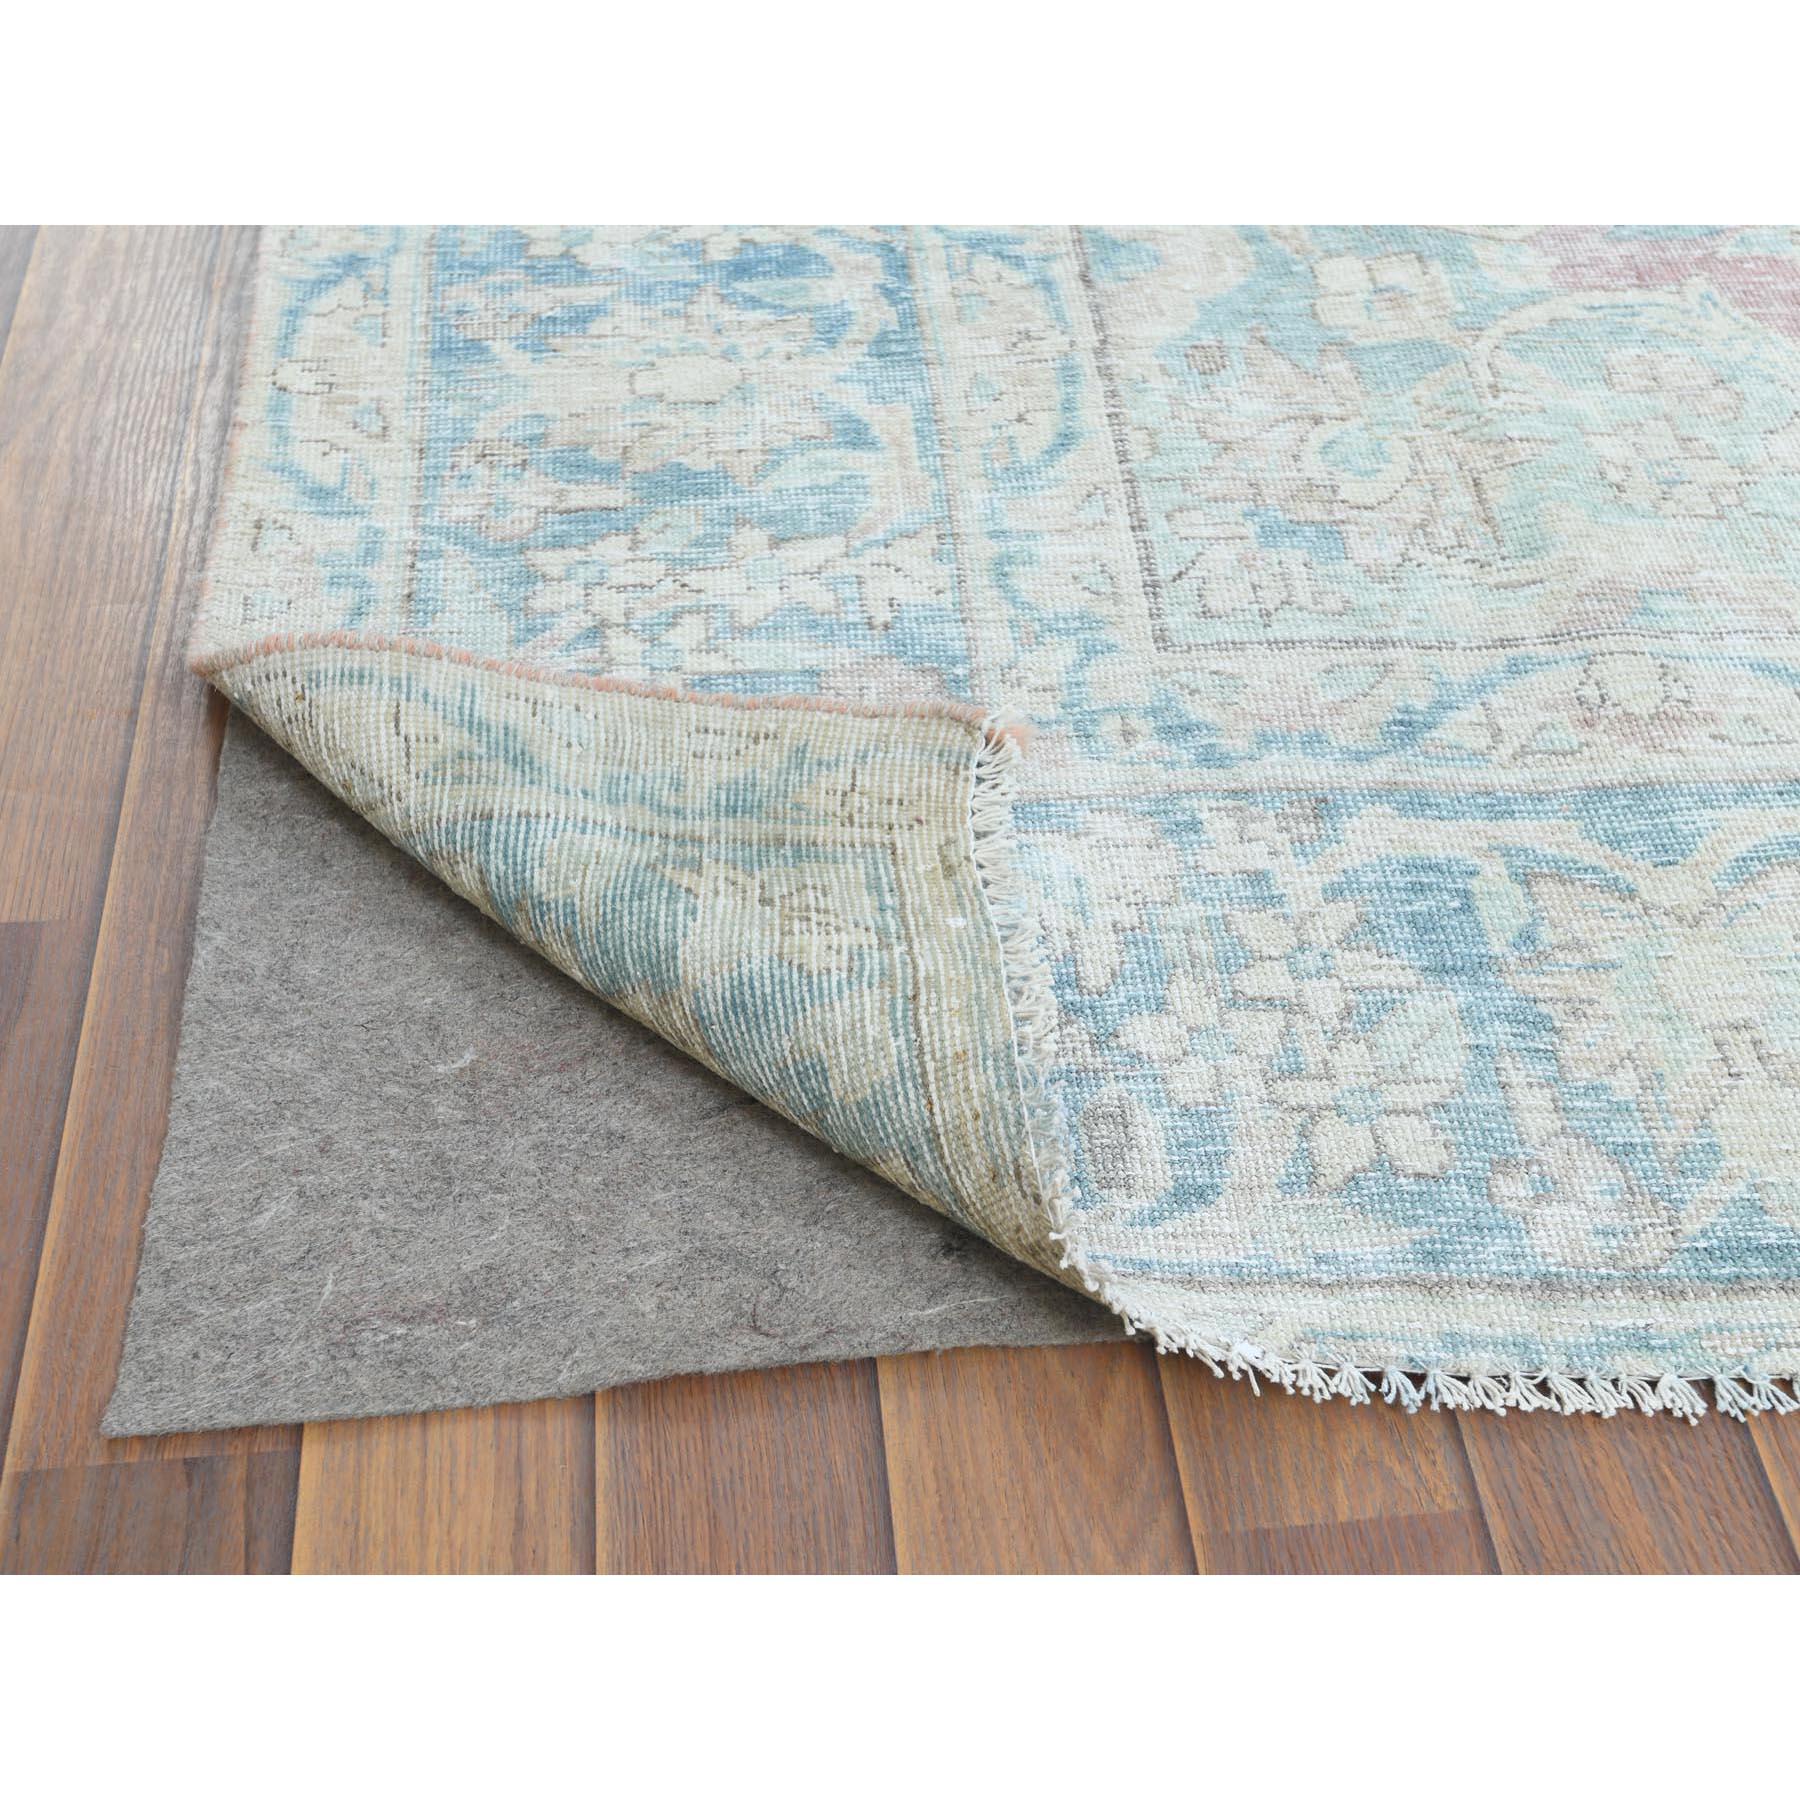 Faded Champagne, Distressed, Vintage Persian Kerman, Worn Wool, Hand Knotted Rug In Good Condition For Sale In Carlstadt, NJ